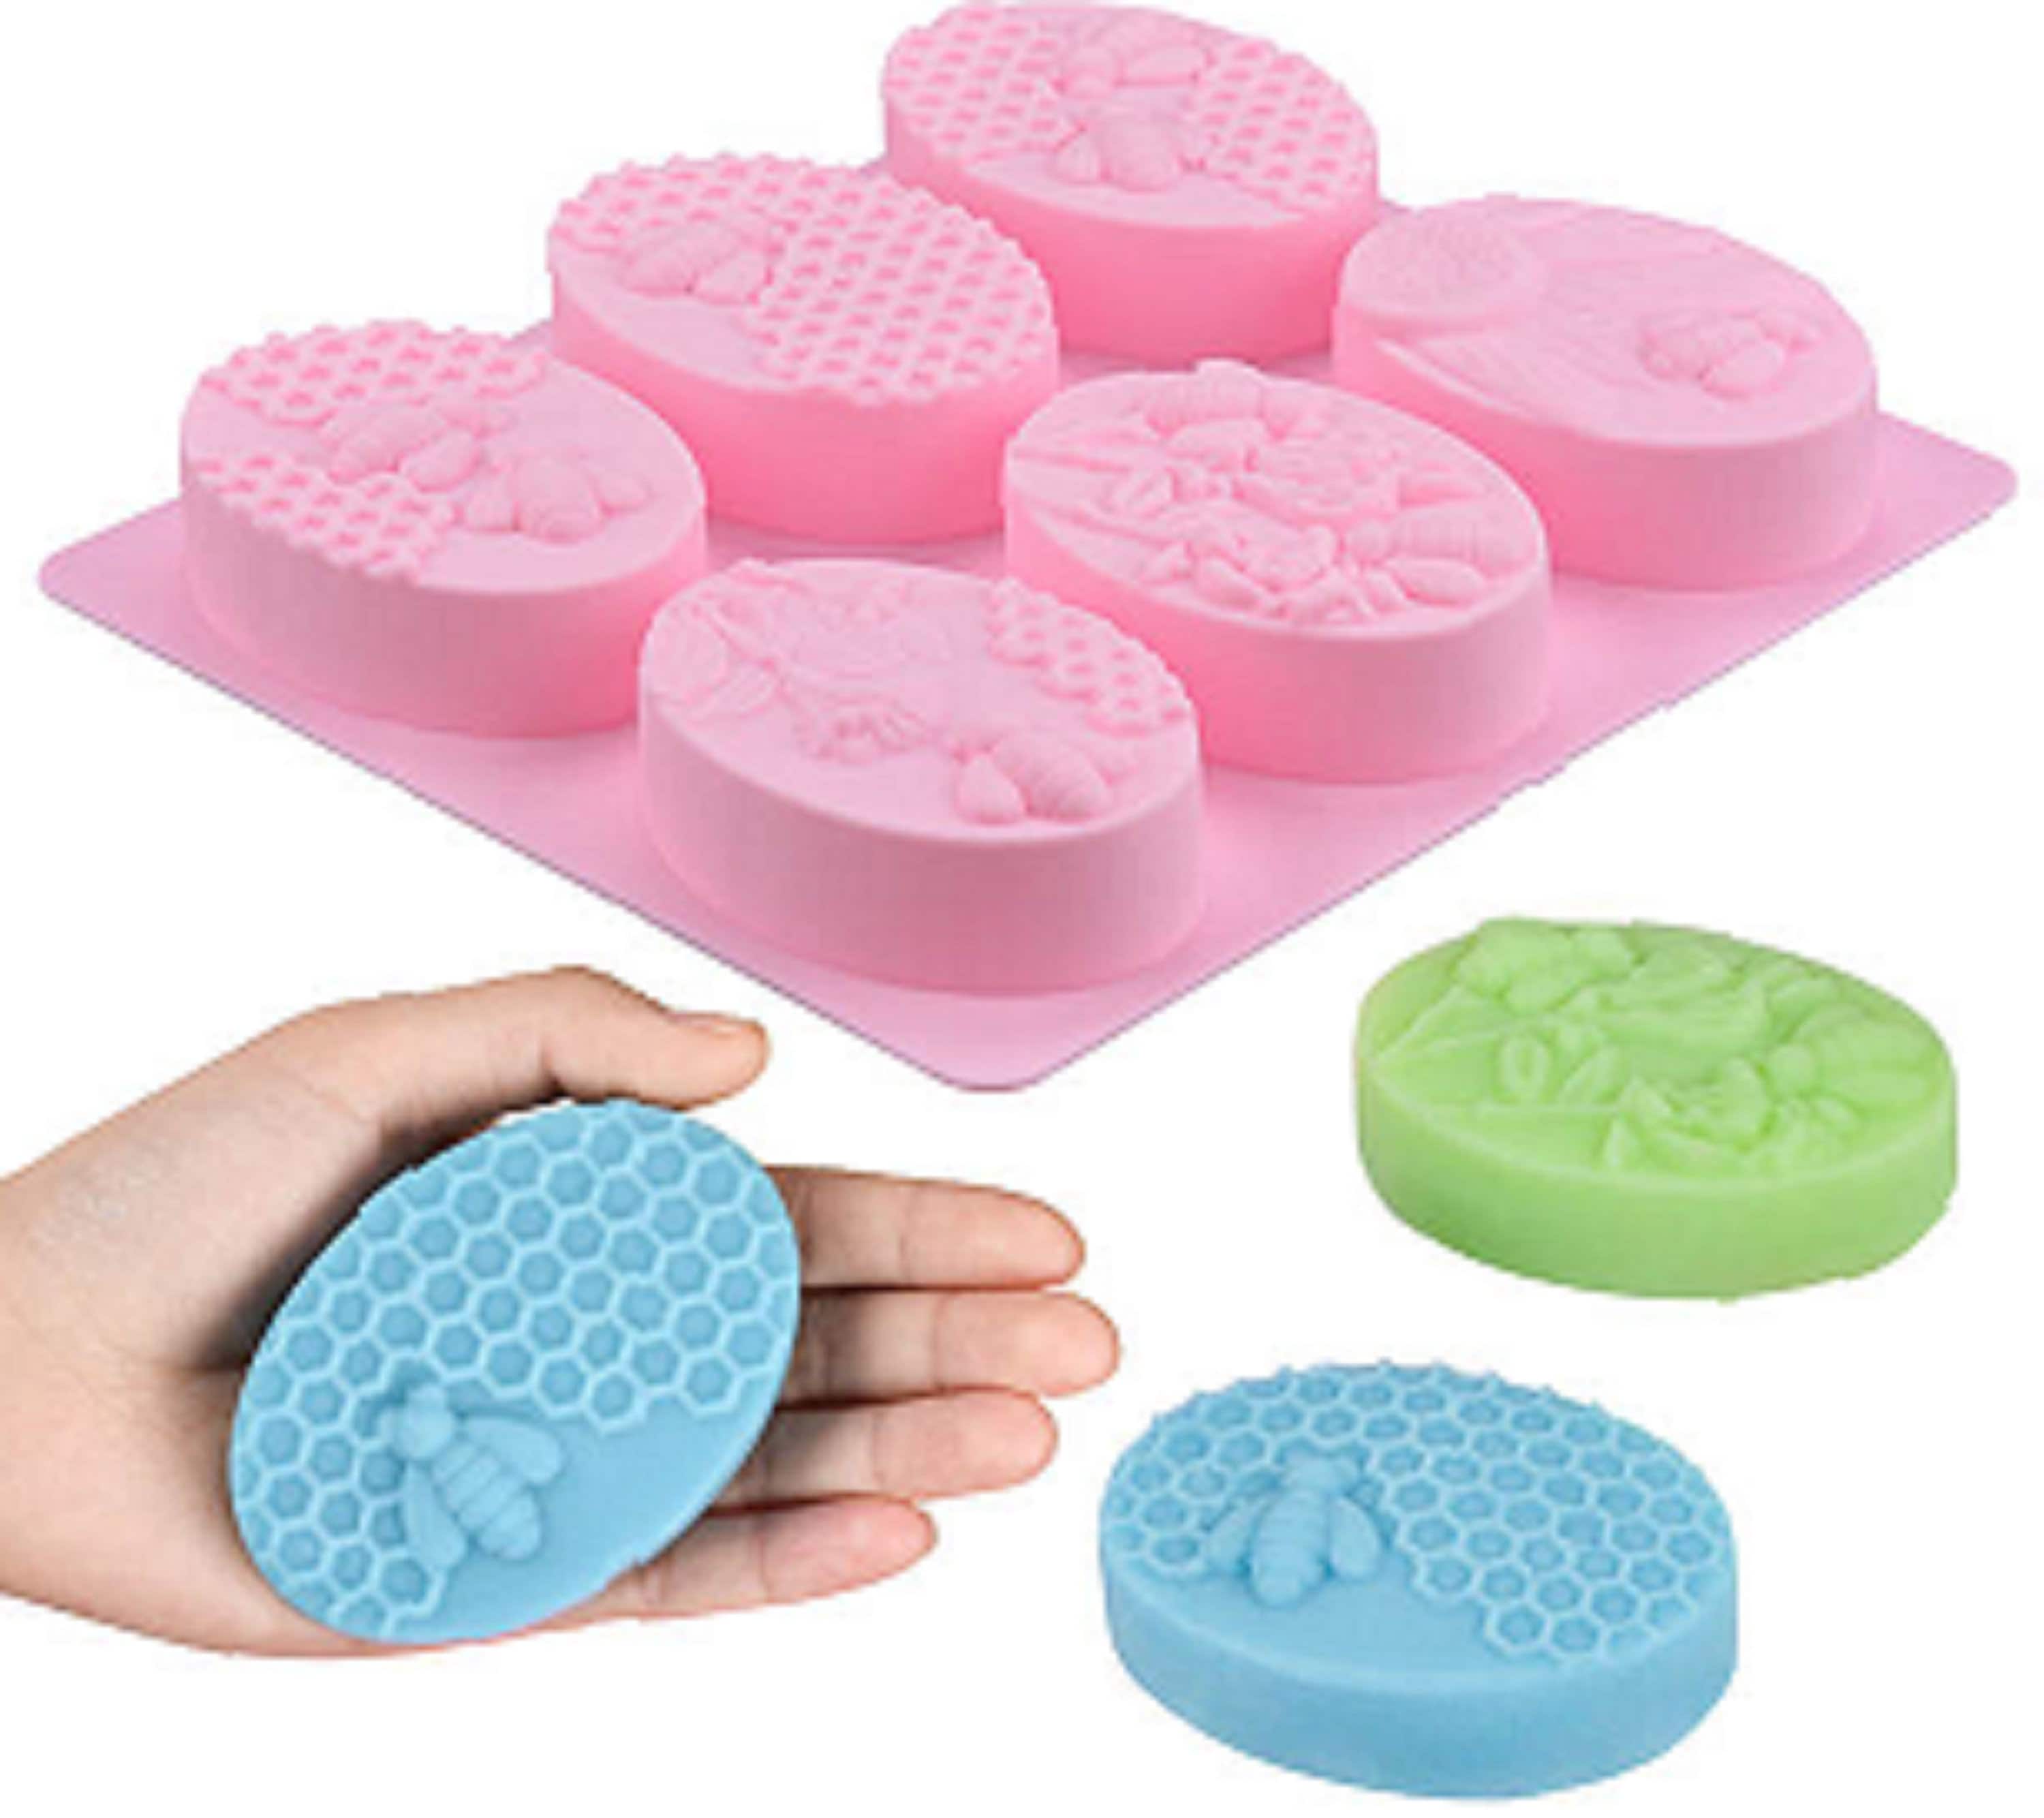 SILIKELOVE 4 Cavity Oval Soap Mold Silicone Molds for Soap Making